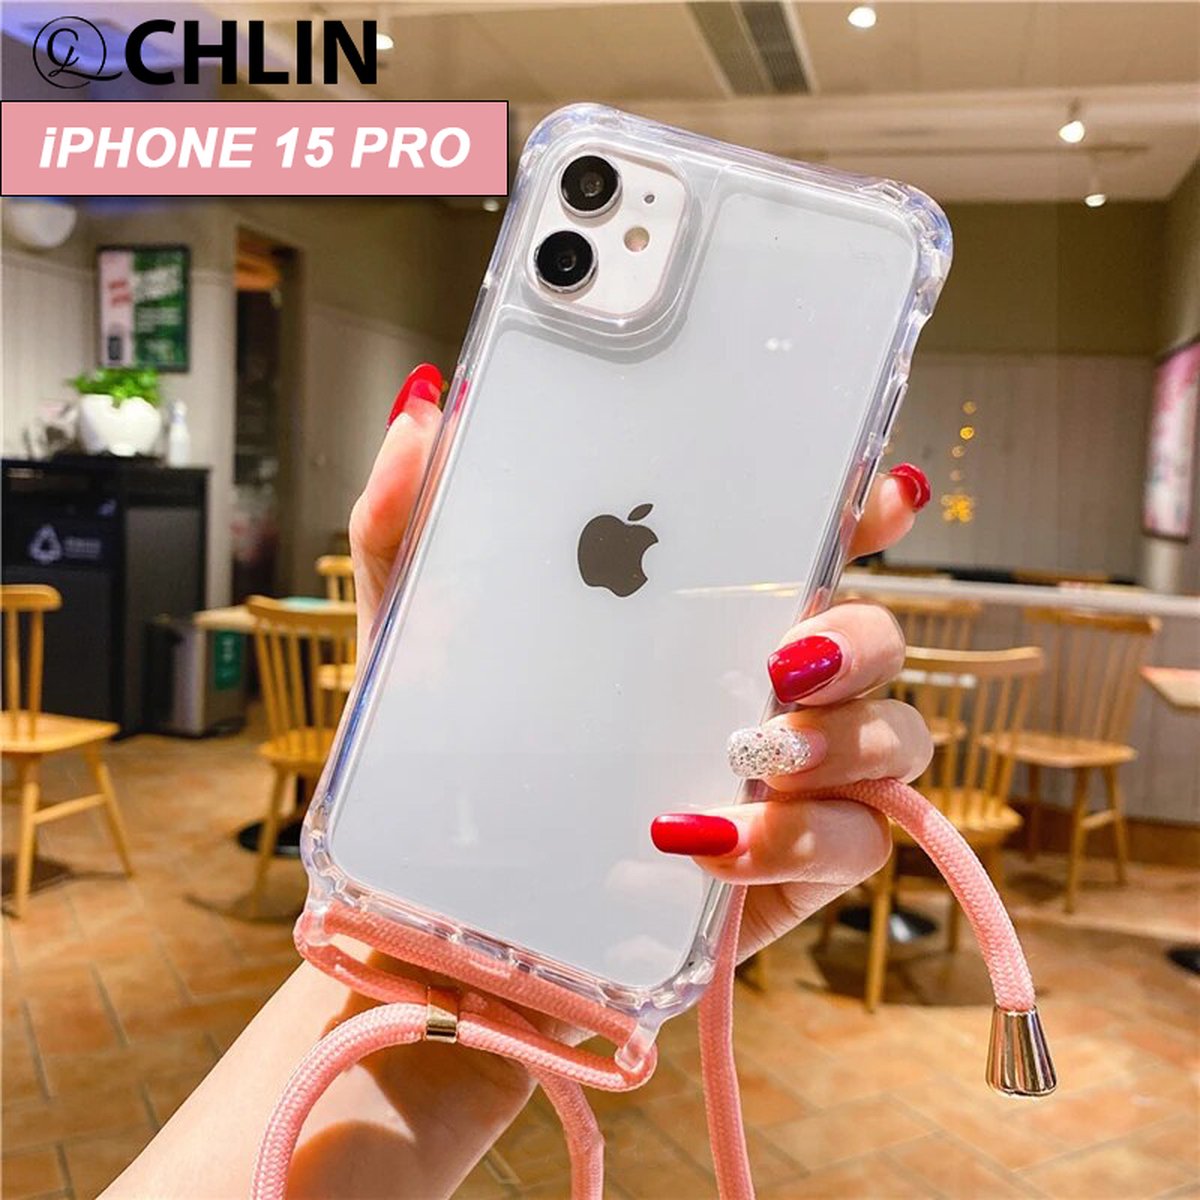 CL CHLIN® - iPhone 15 Pro transparant hoesje met ROZE koord - Hoesje met koord iPhone 15 Pro - iPhone 15 Pro case - iPhone 15 Pro hoes - iPhone hoesje met cord - iPhone 15 Pro bescherming - iPhone 15 Pro protector.